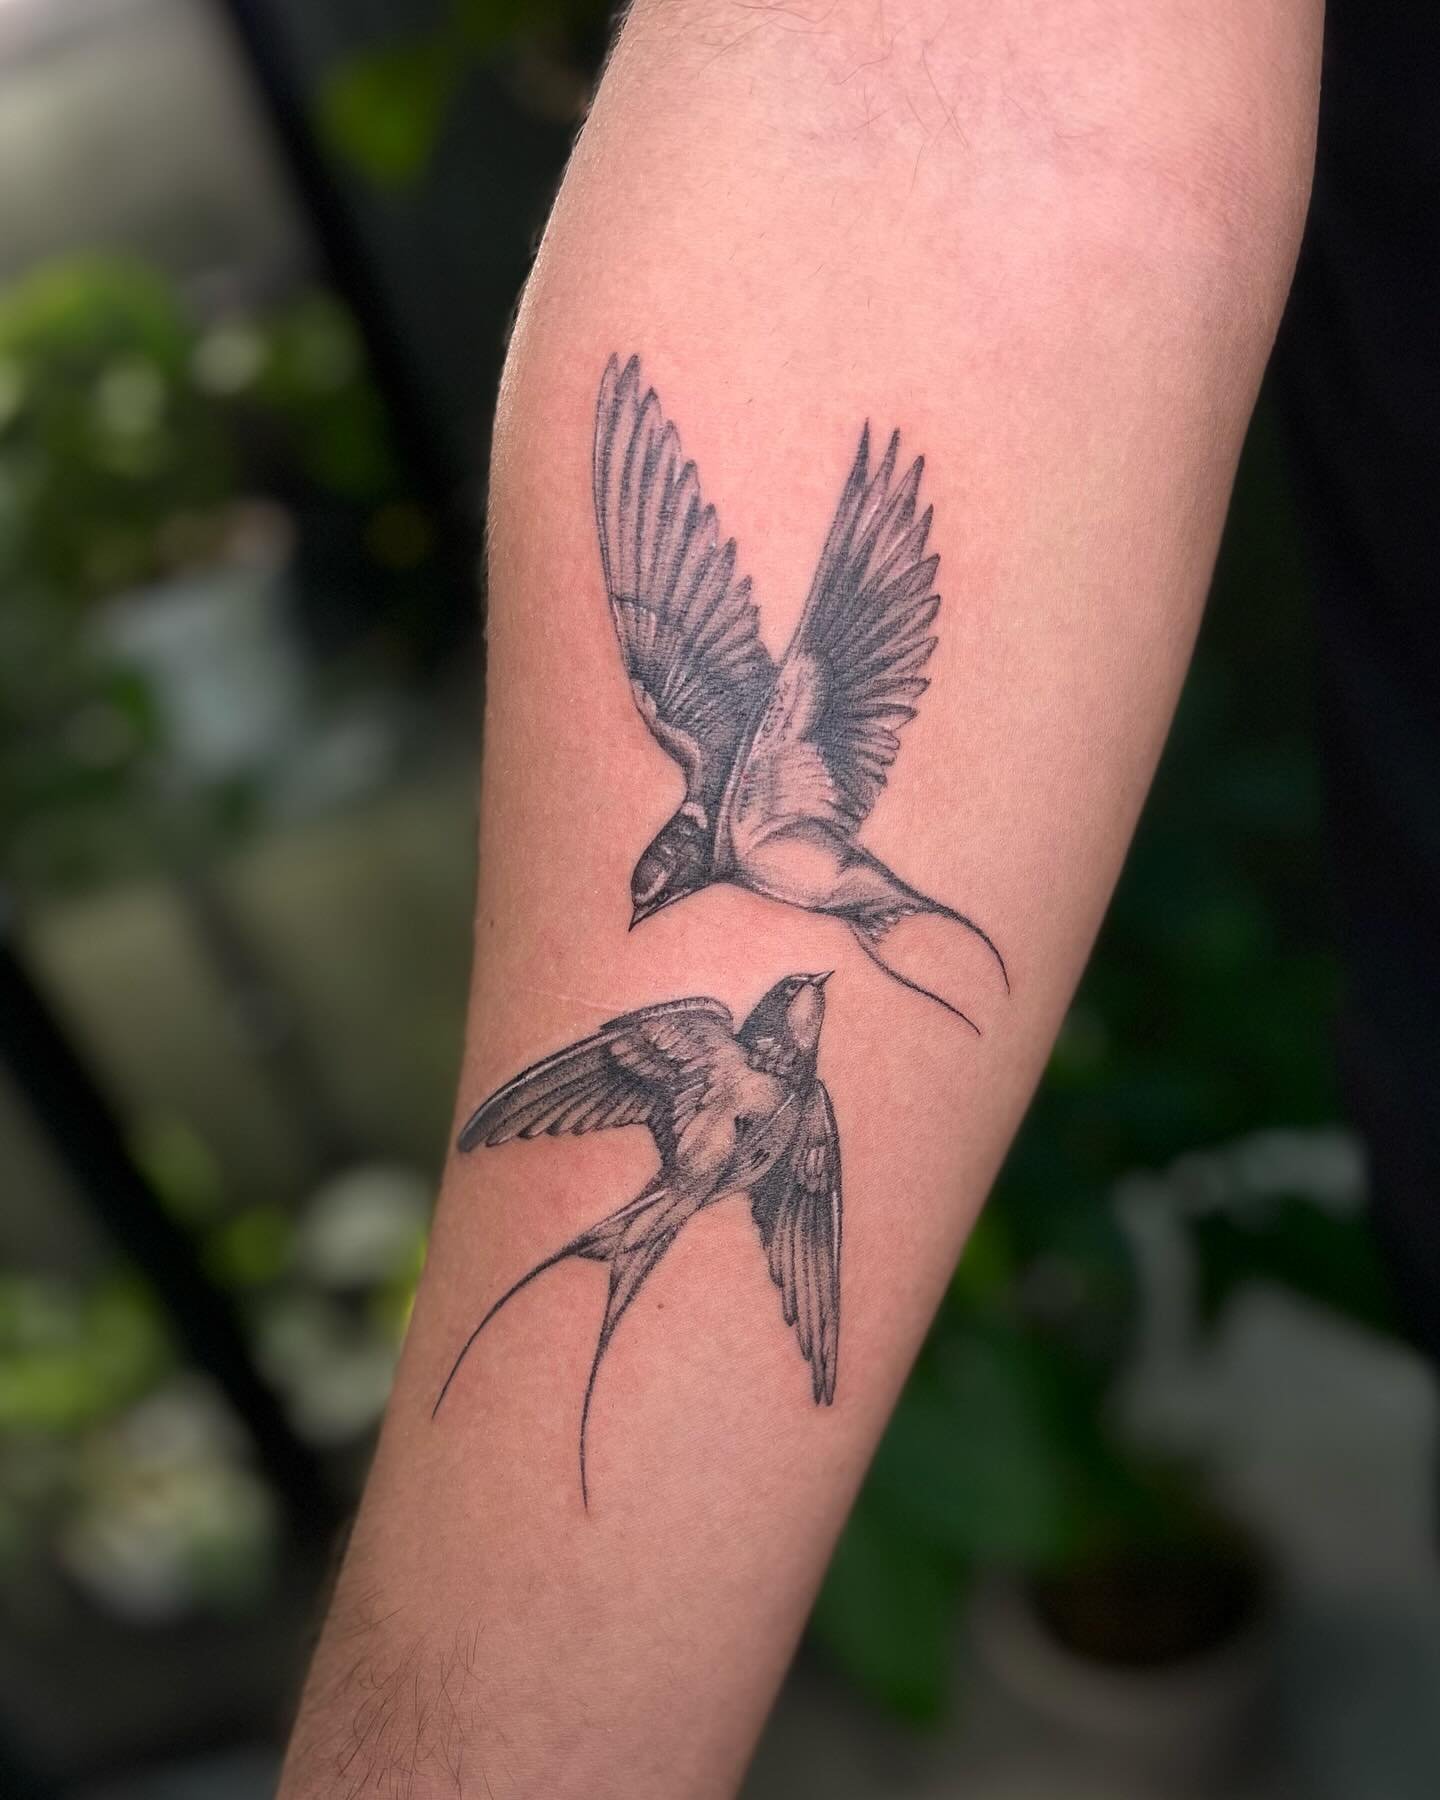 this was for Leo&rsquo;s first tattoo🕊️ thank you for the trust! 

Now booking for July-August. Use the link in my bio to my website to find out how to book🖤 You can email me to talk about your ideas: chevellestattoos@gmail.com
Chevelletattoos.com 